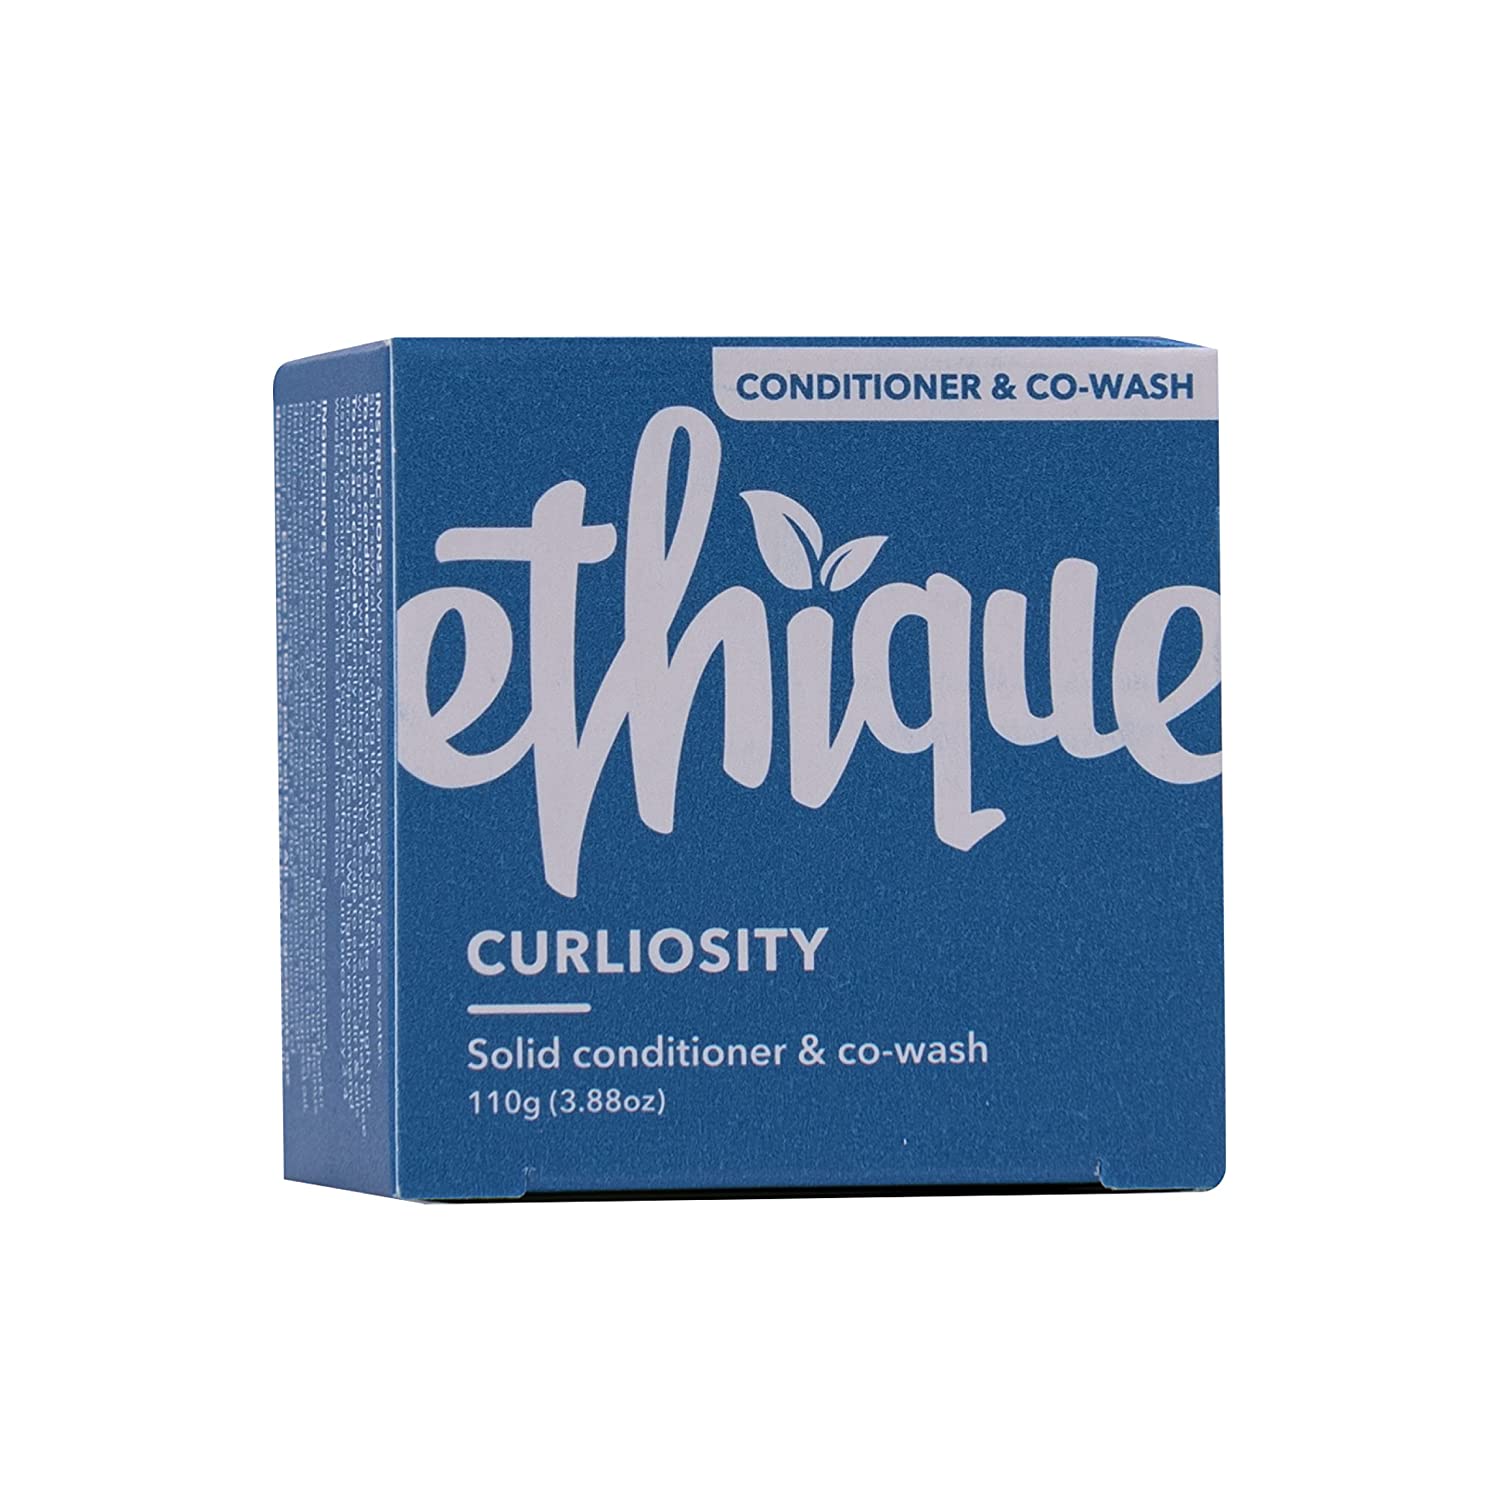 Ethique Solid Conditioner Bar for Curly Hair